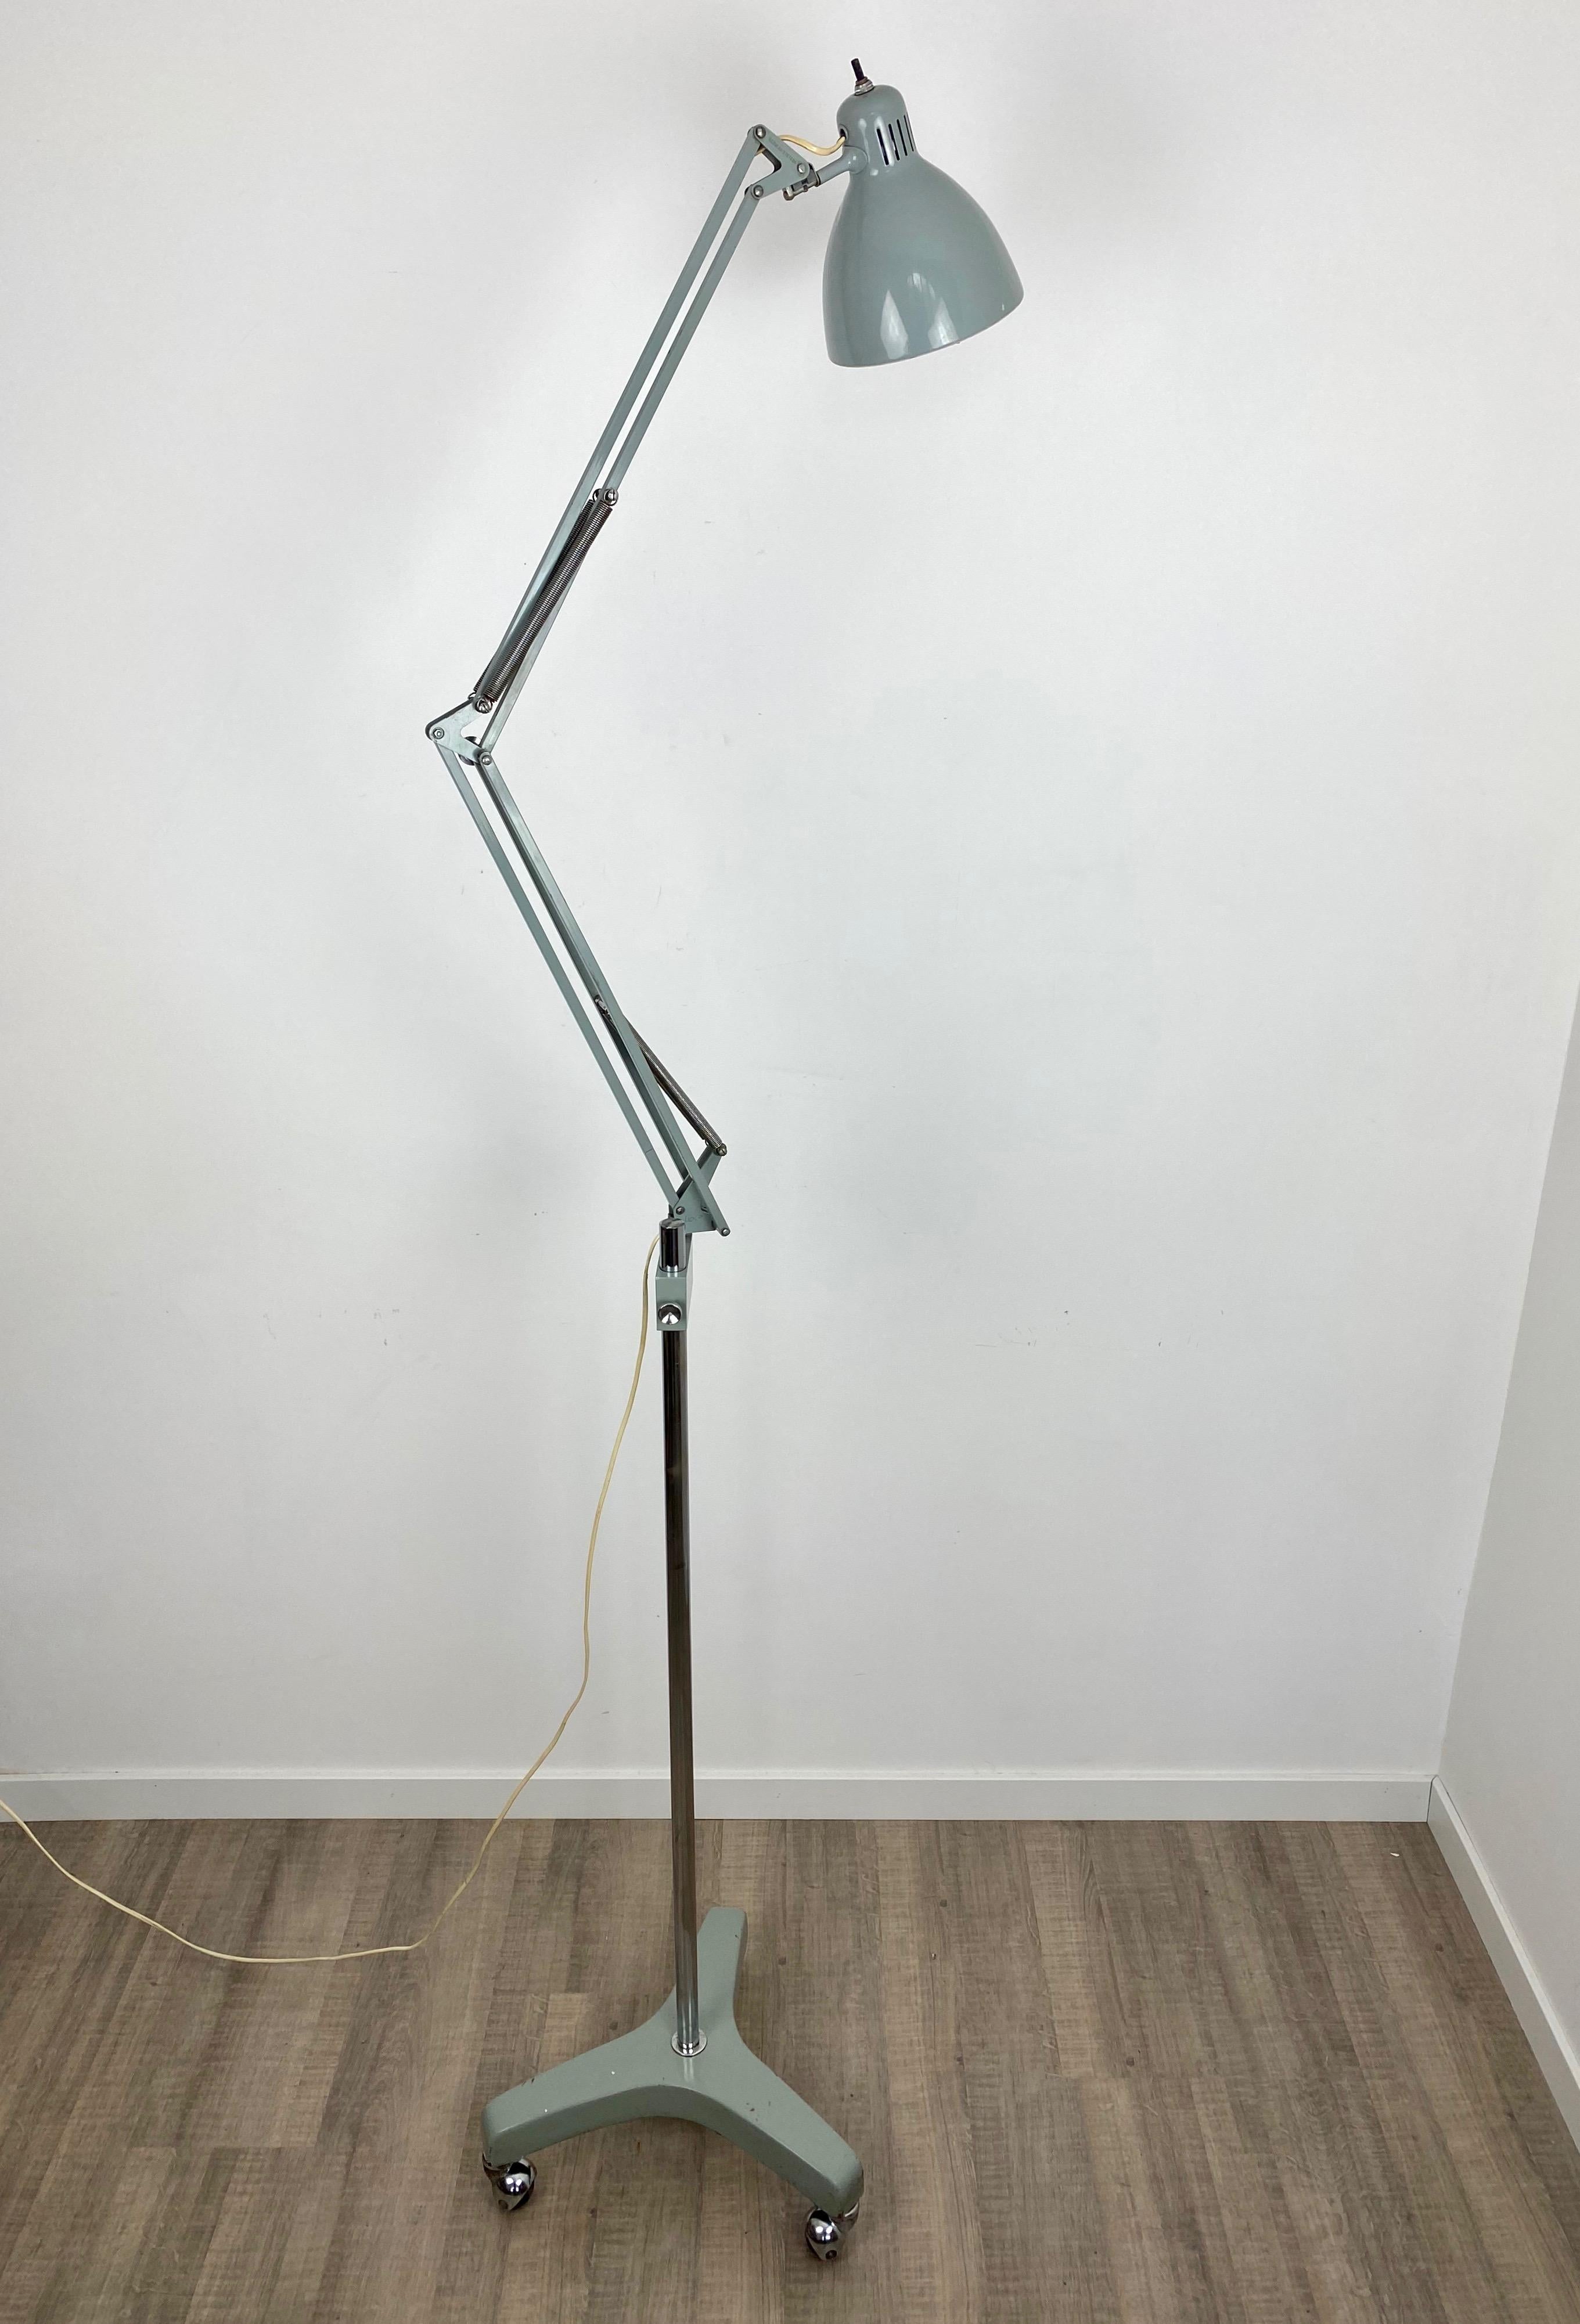 A floor lamp designed by Arne Jacobsen for Luxo Lamp (signed), basement with castors. Adjustable height and grade. Lacquered and chromed metal, aluminium diffuser. Model: Naska Loris. Manufactured in Norway, 1950s.